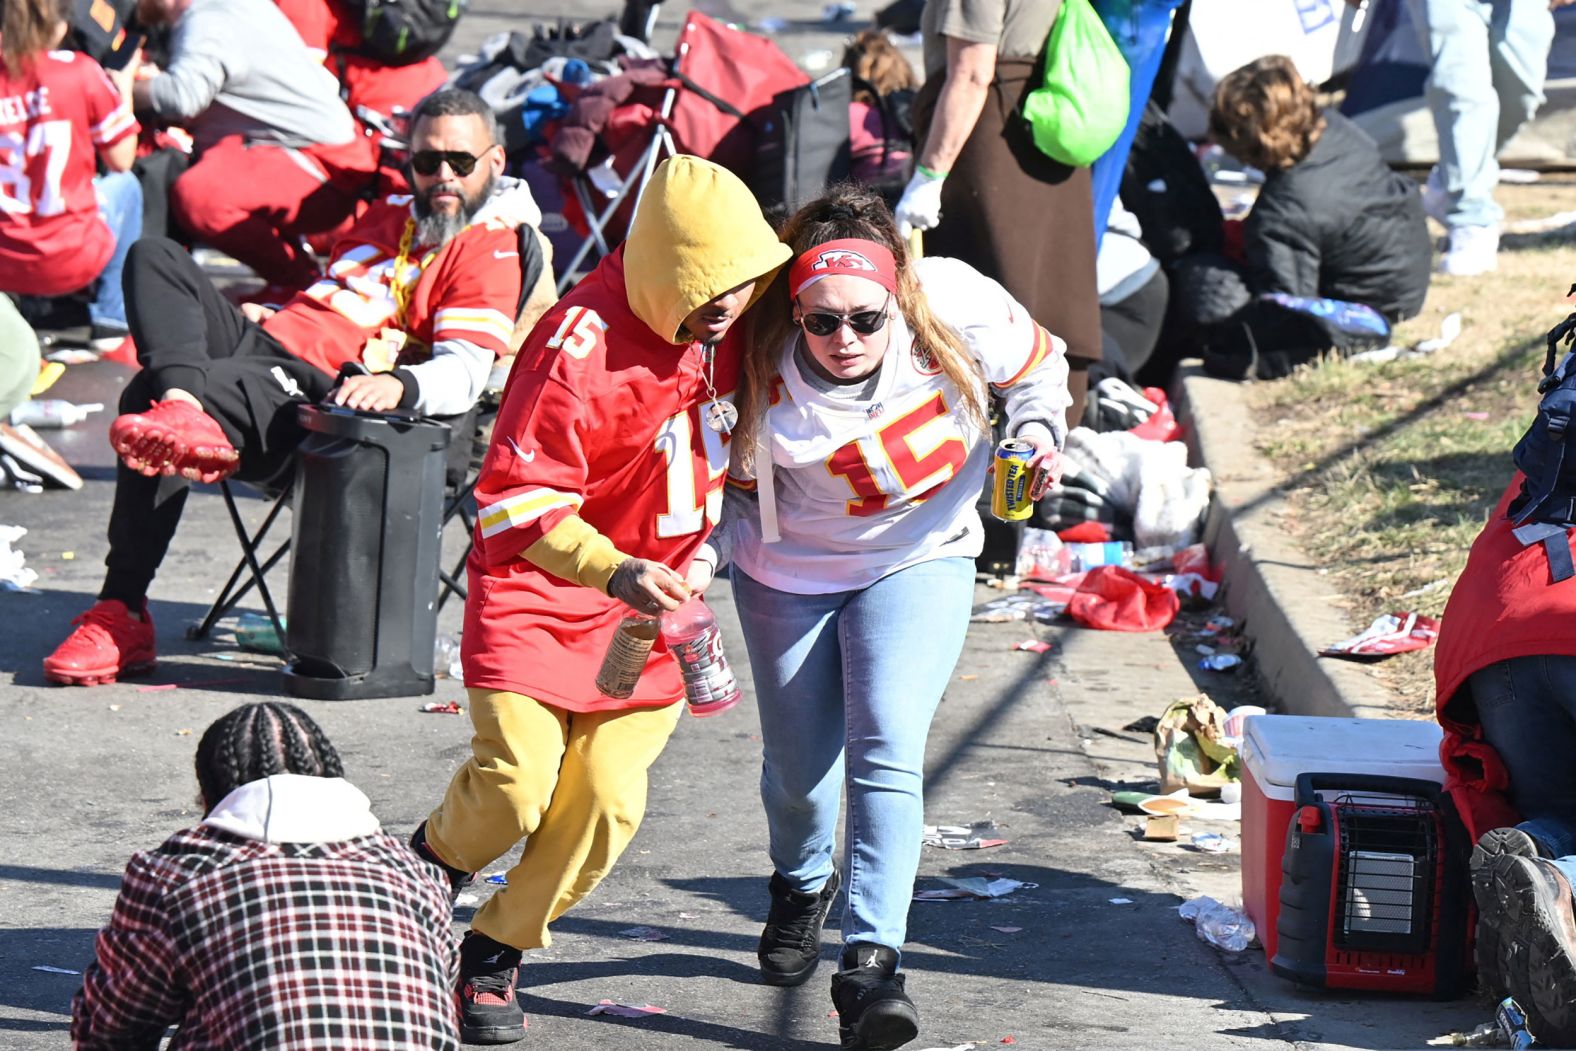 A couple of Chiefs fans leave the area after shots were fired.